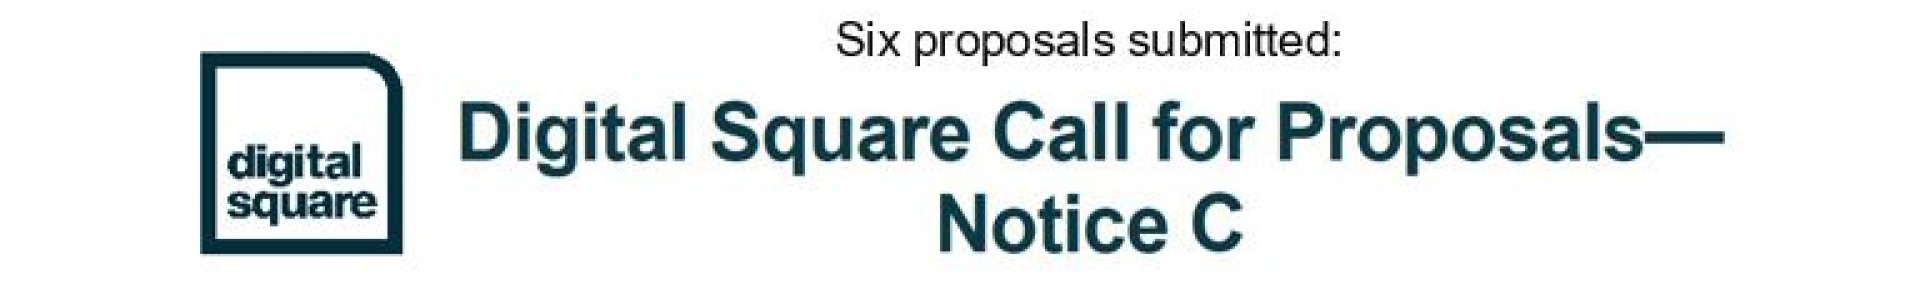 Six proposals submitted to Digital Square Call for Proposals